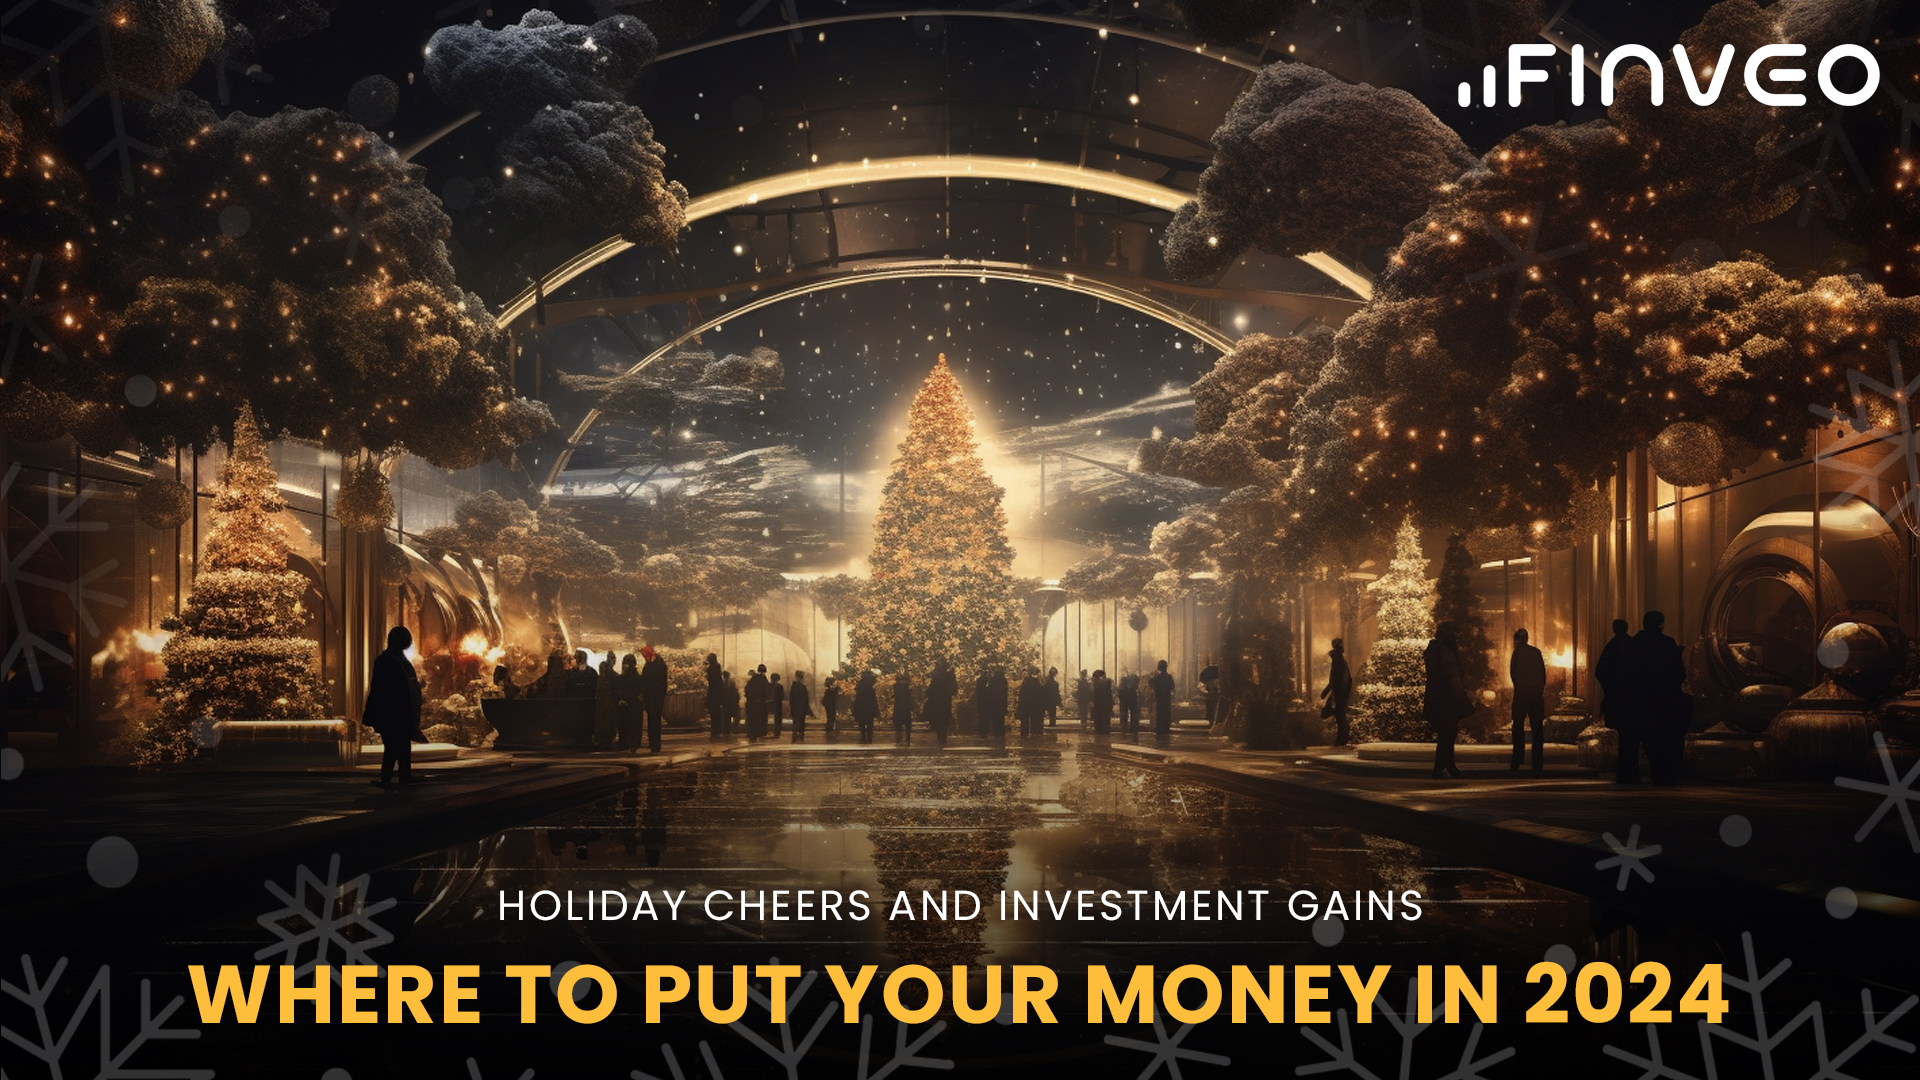 Holiday Cheers and Investment Gains: Where to Put Your Money in 2024